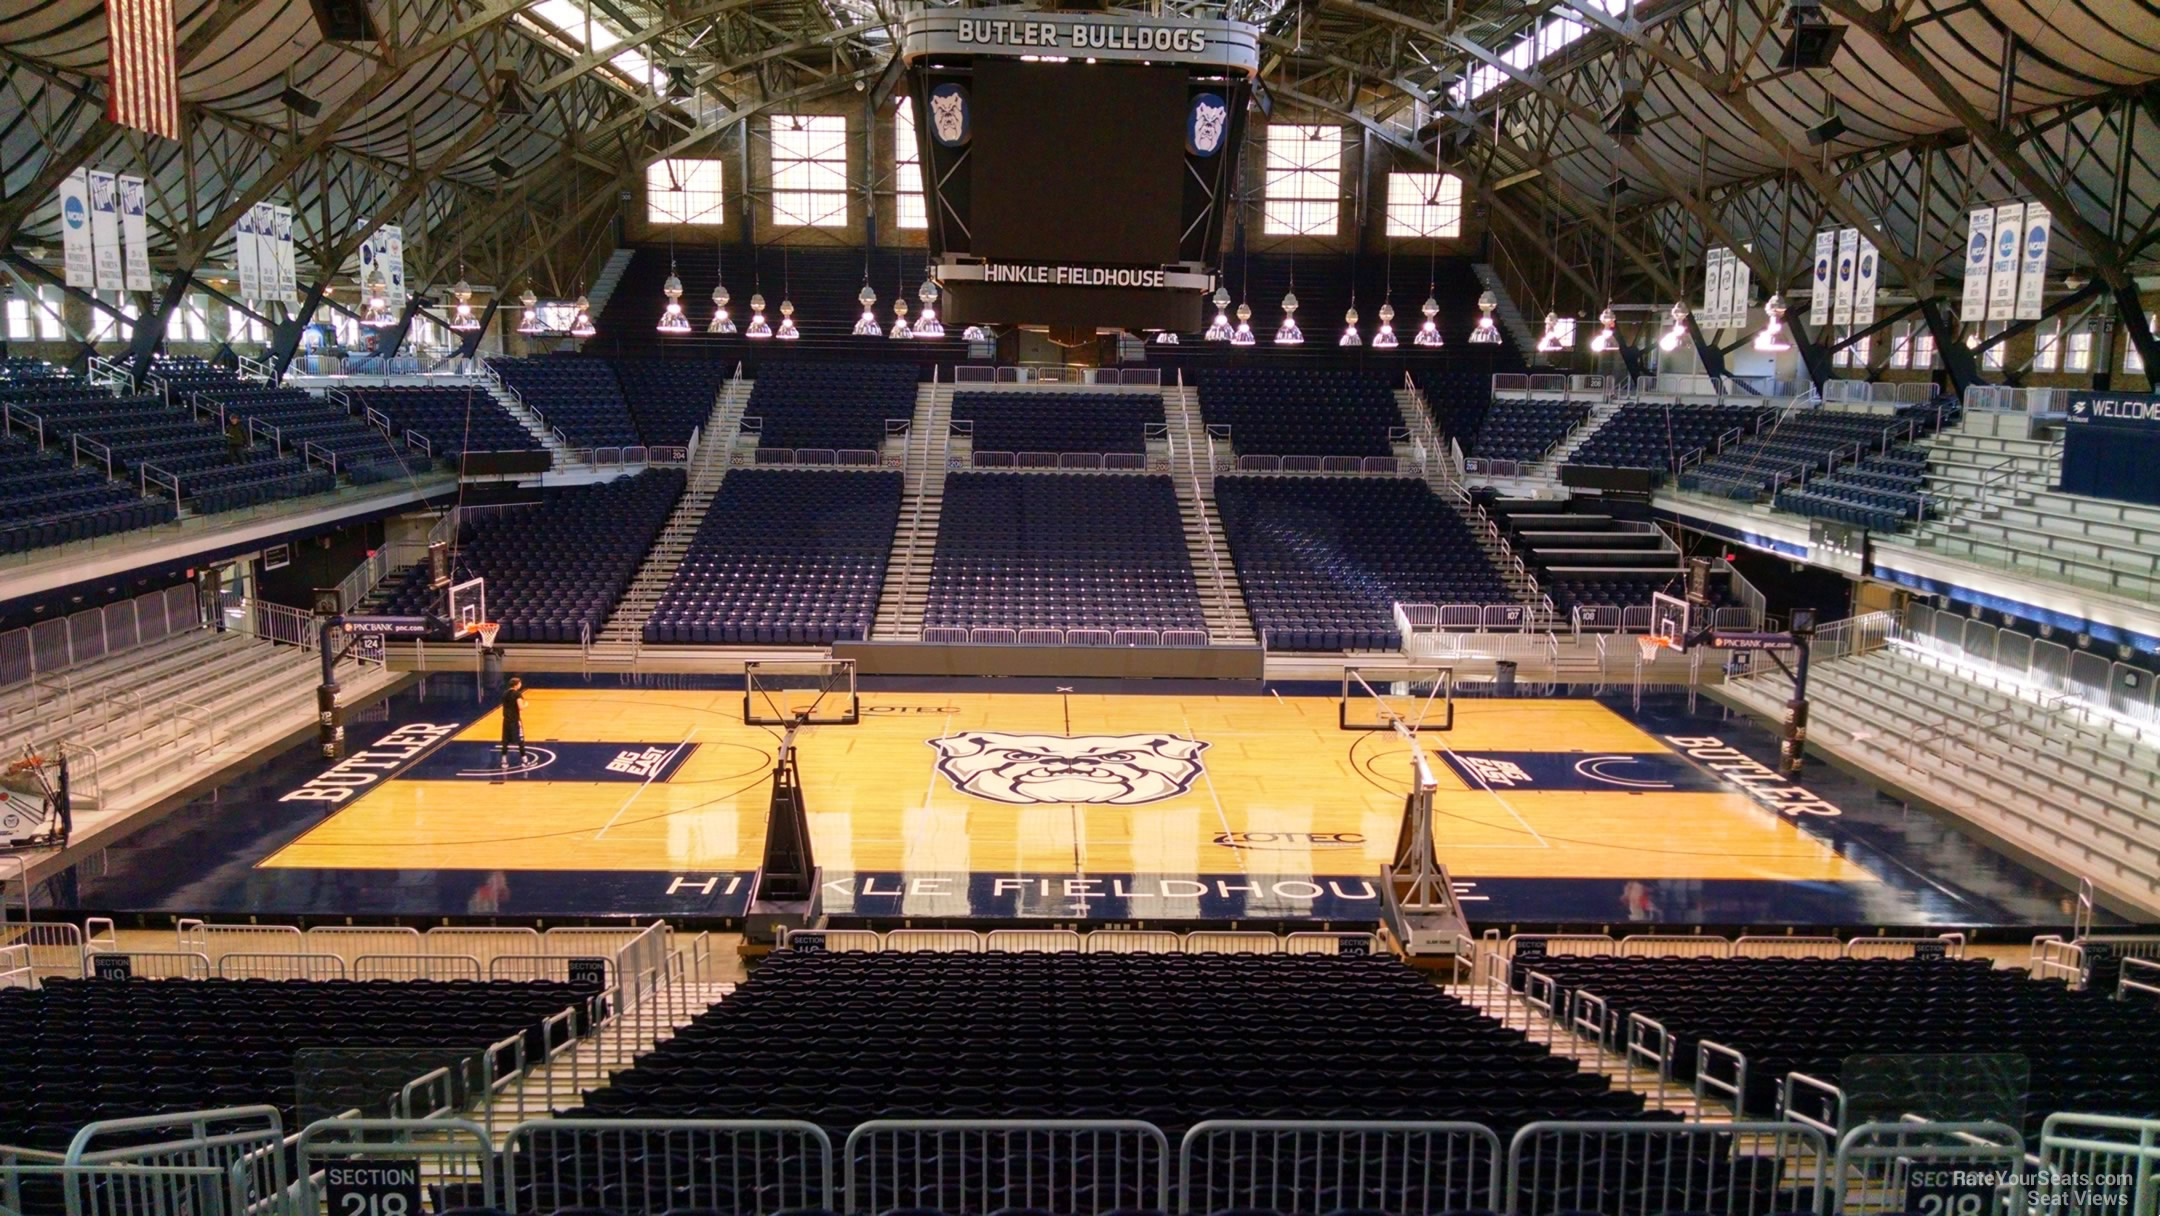 section 218, row 10 seat view  - hinkle fieldhouse